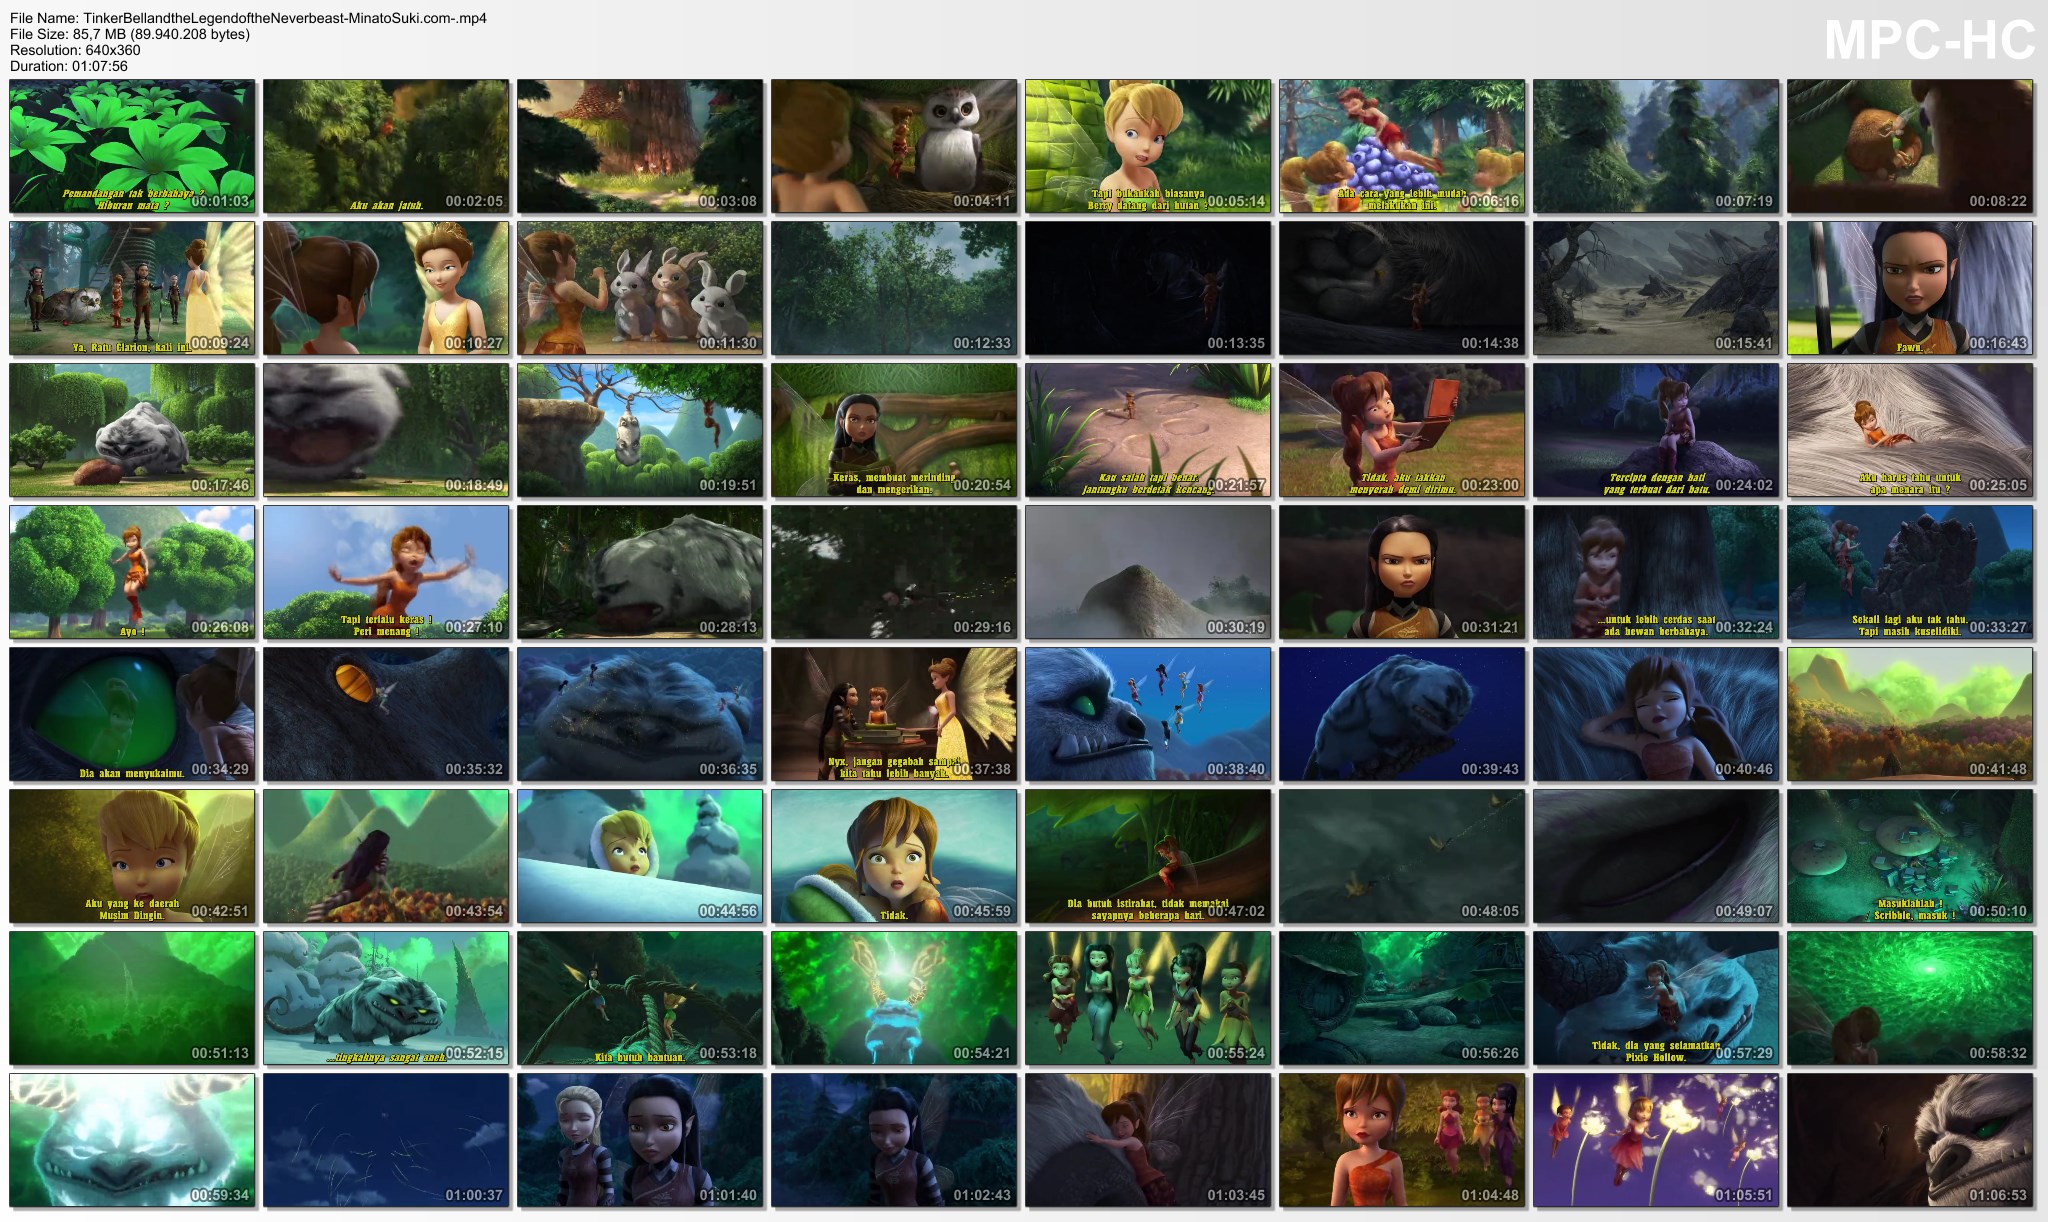 download film tinkerbell sub indonesia